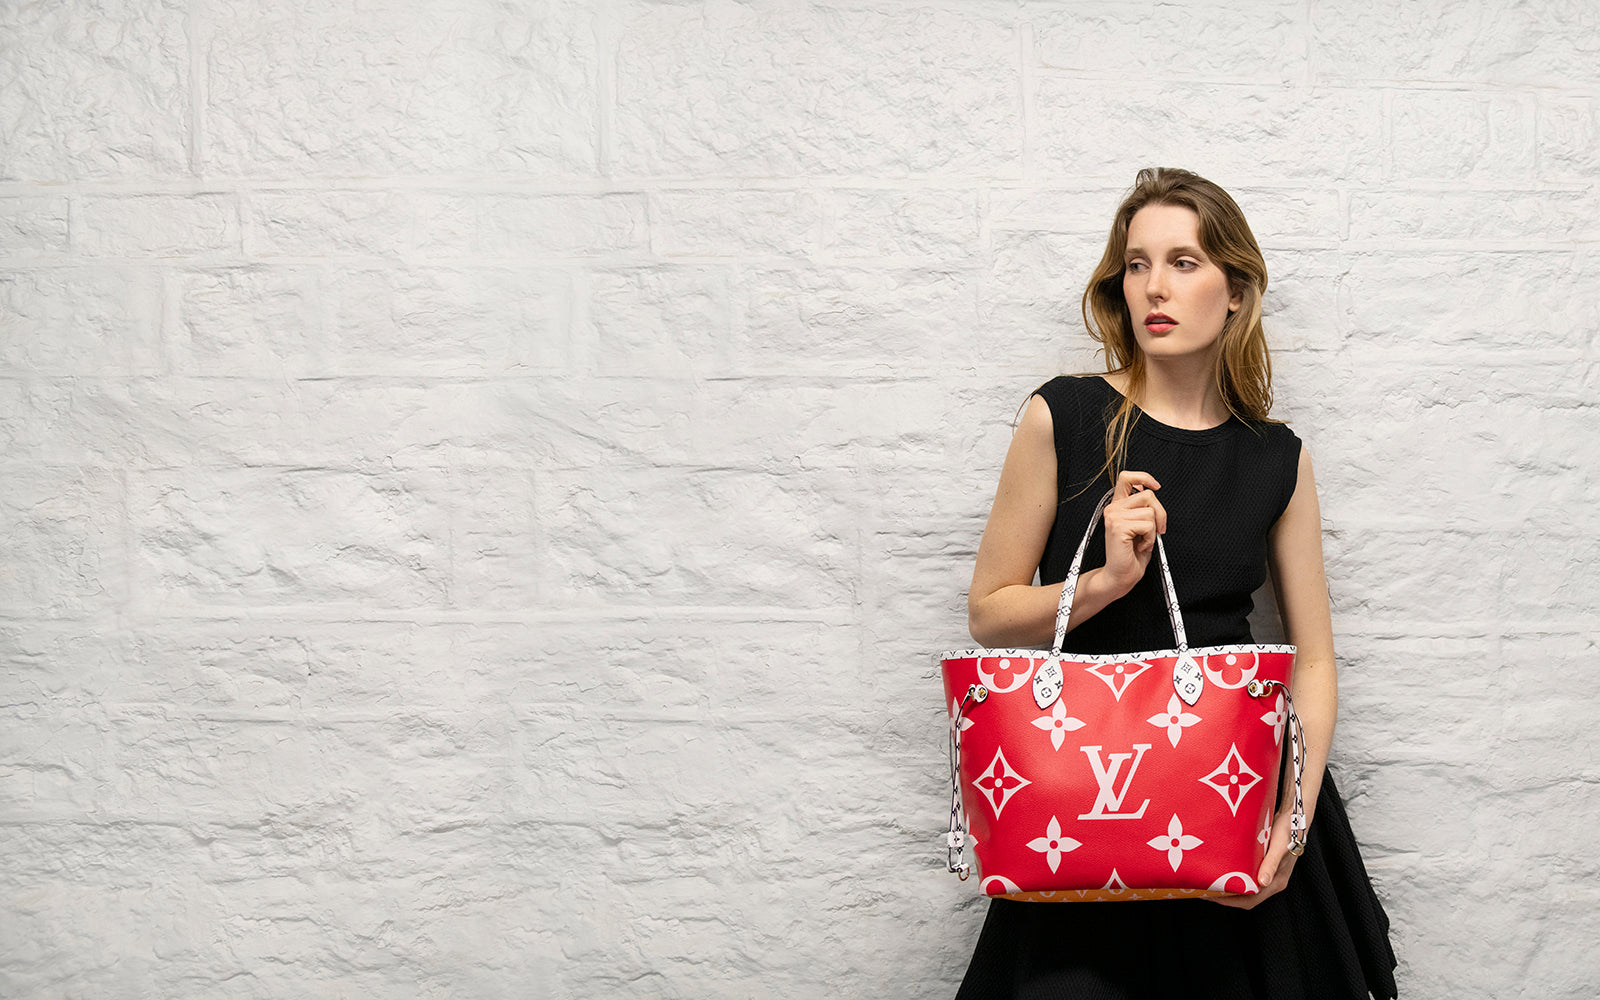 History of the bag: Louis Vuitton Neverfull